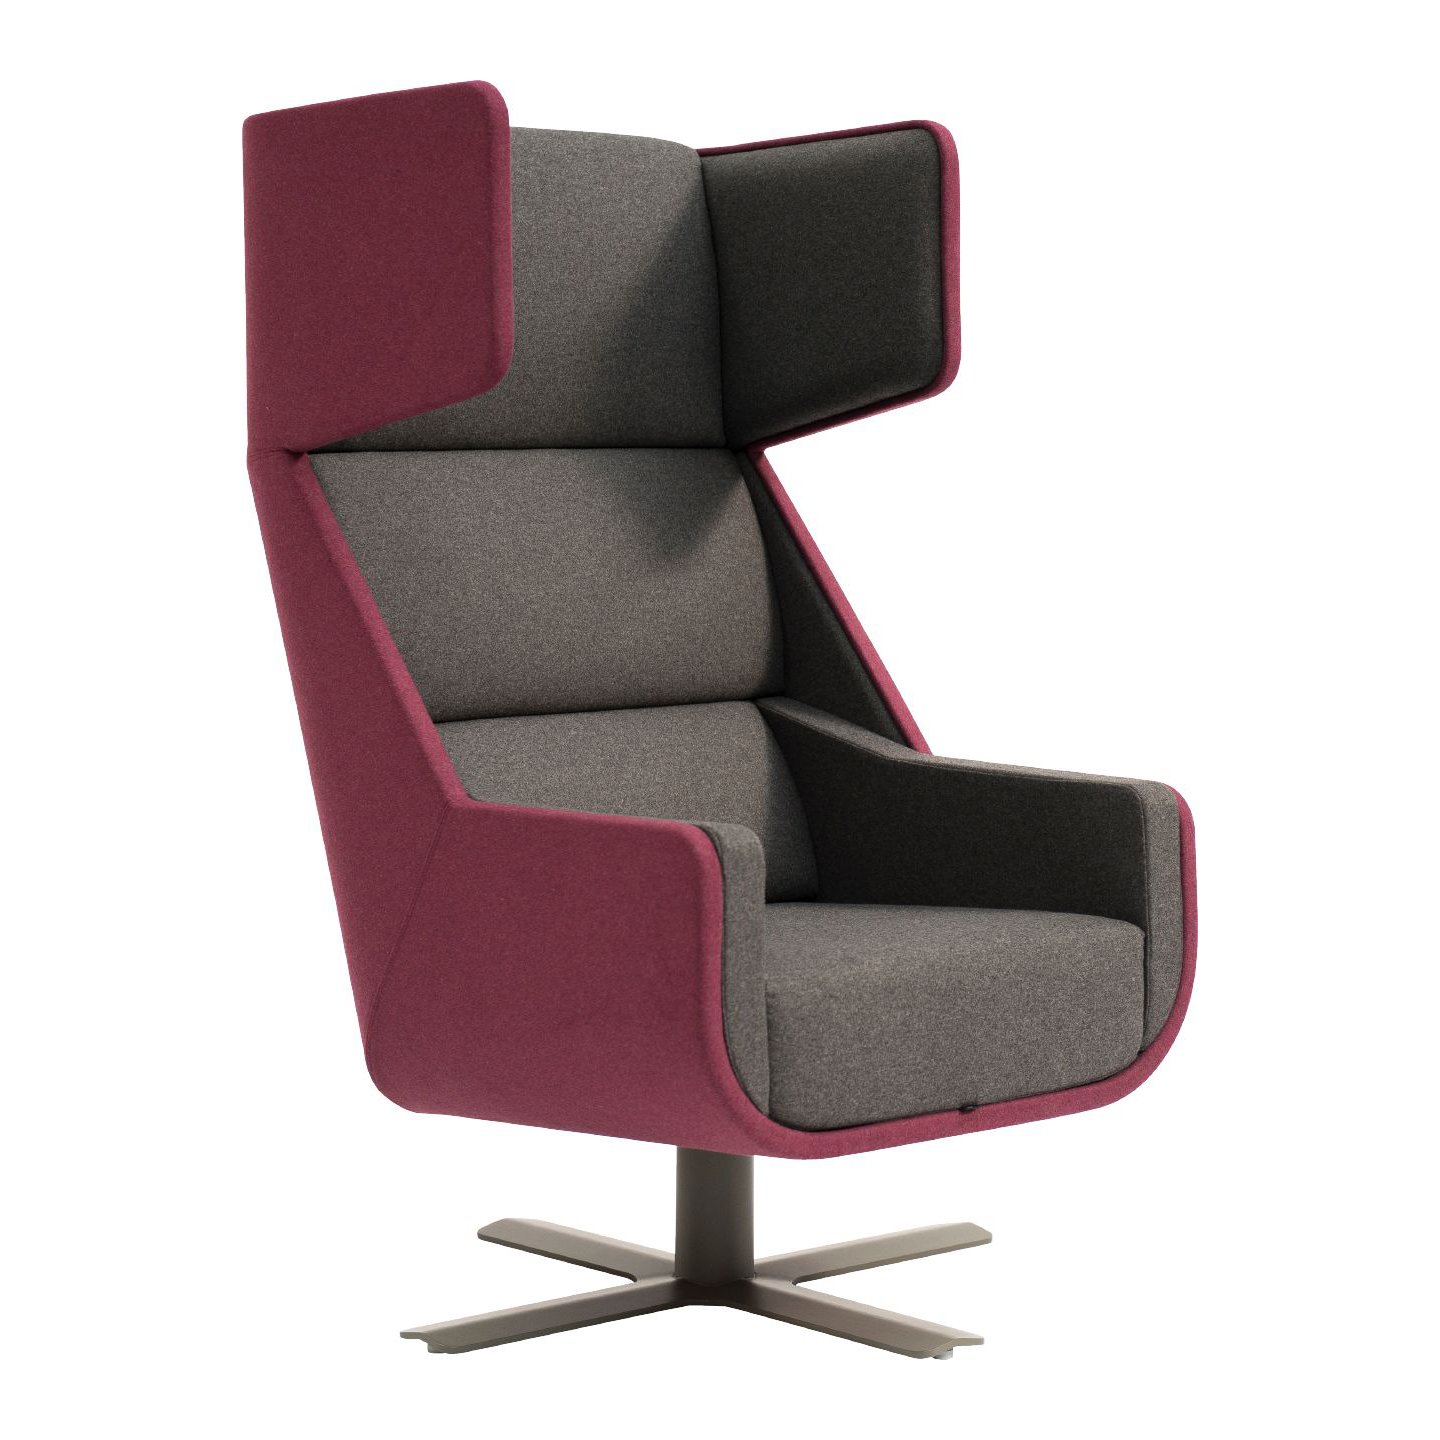 Haworth Buzzime chair in maroon and grey color